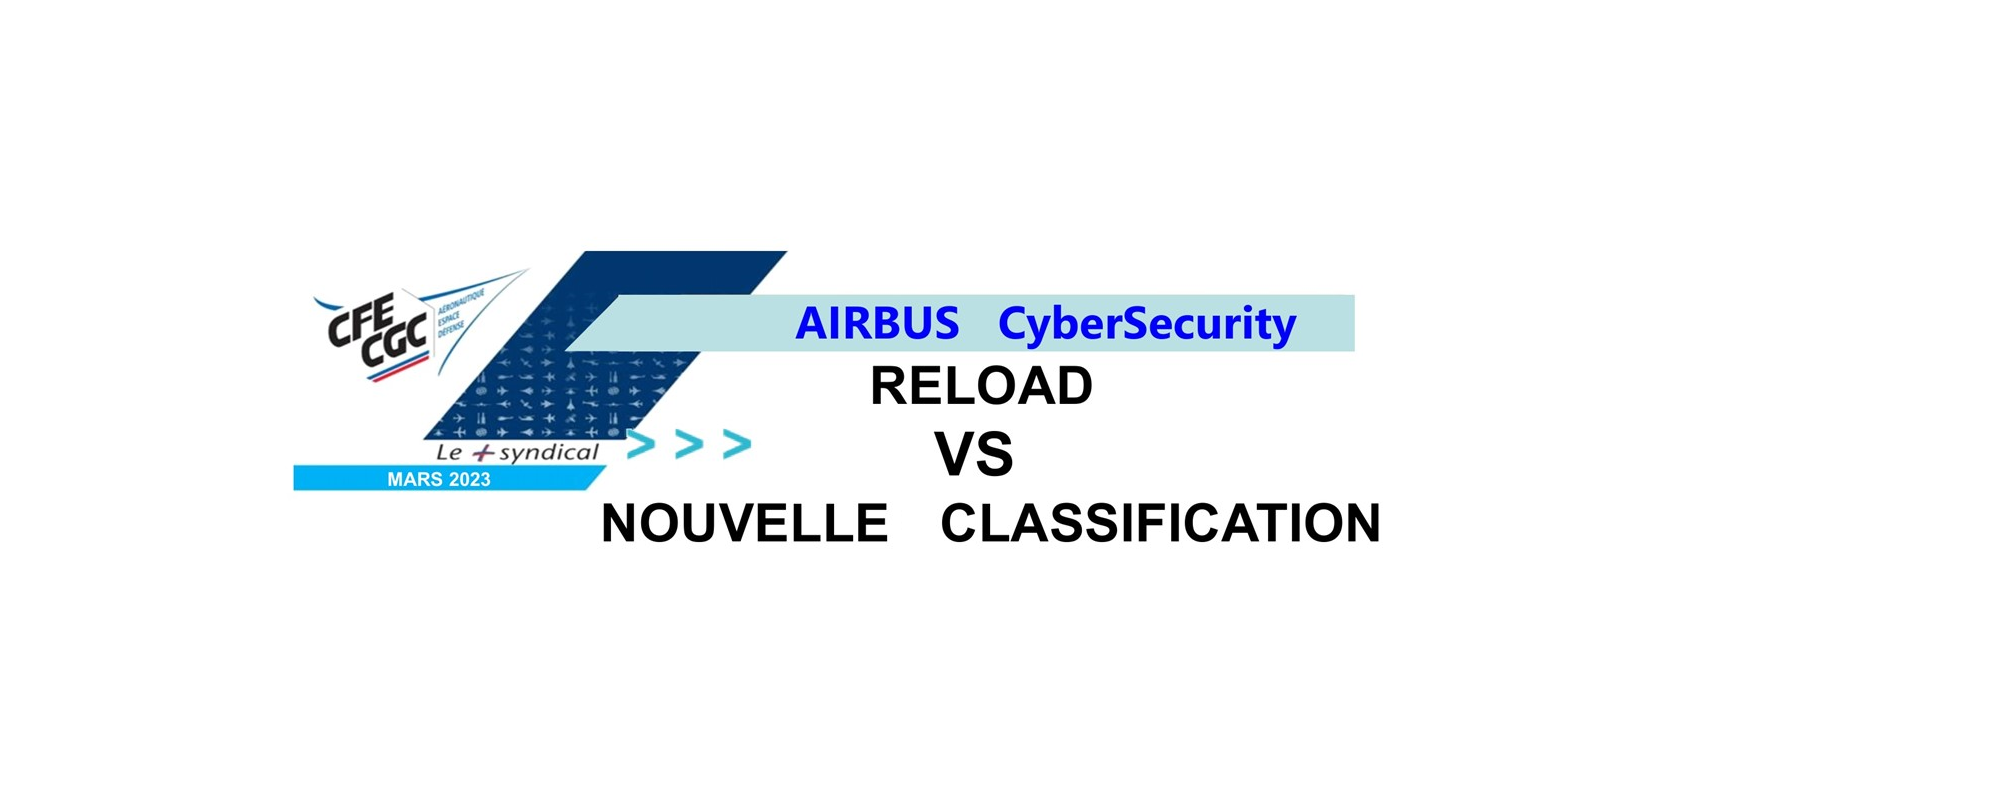 Airbus Cybersecurity